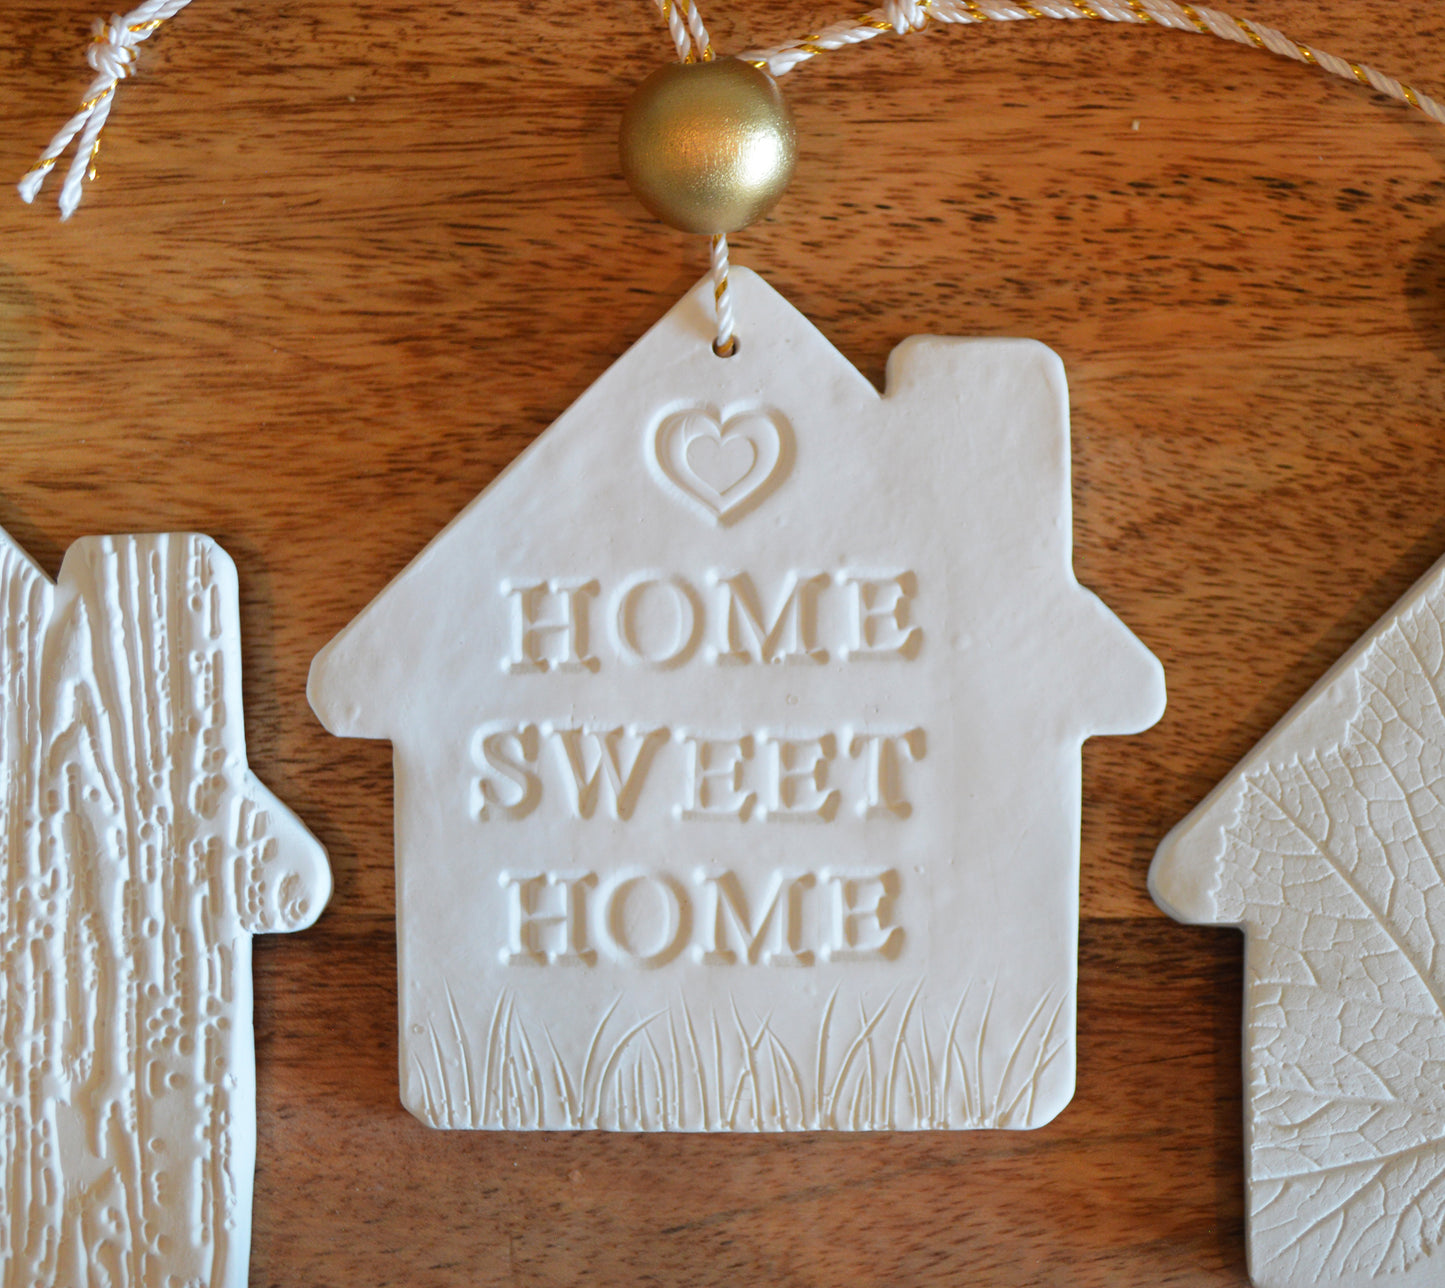 4 pure white house shaped ornaments